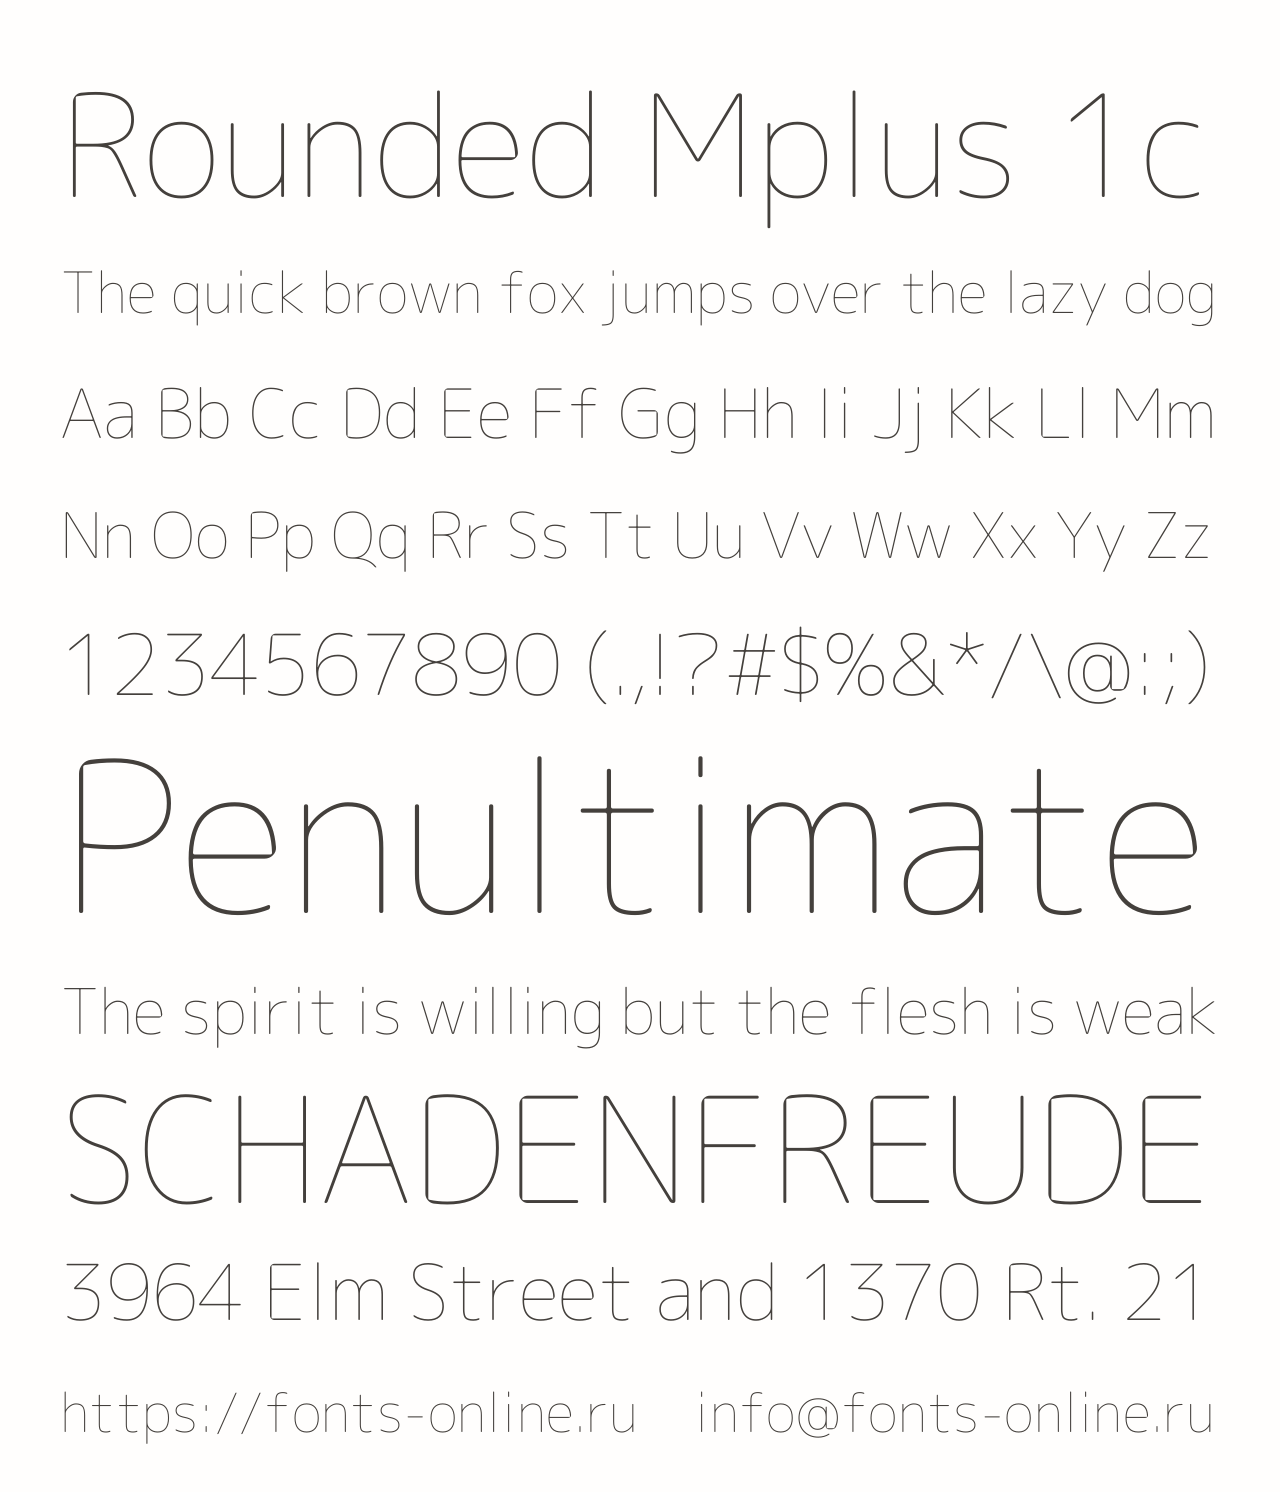 Шрифт Rounded Mplus 1c